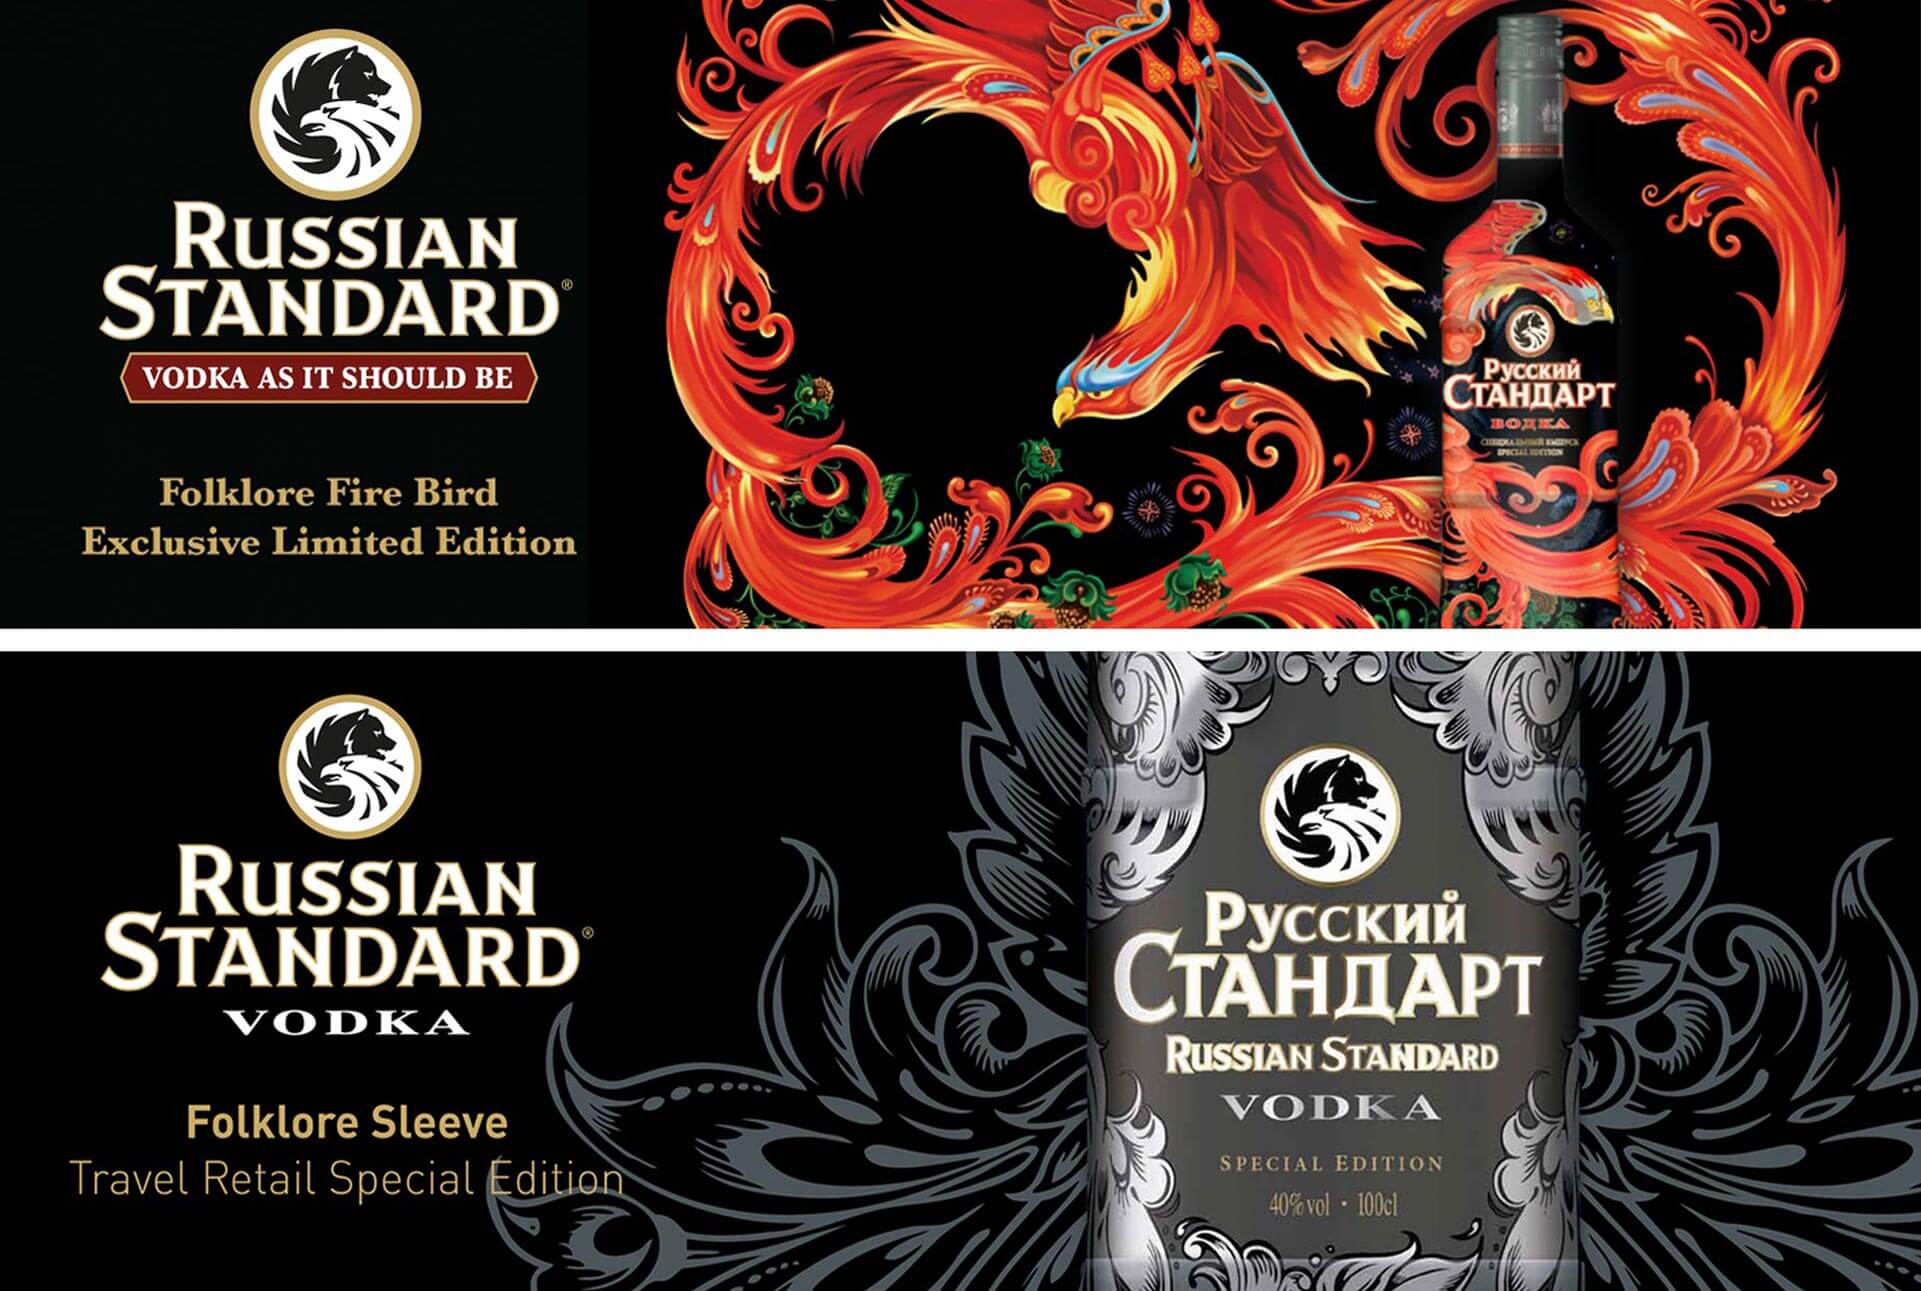 Russian Standard Vodka Folklore Fire Bird Limited Edition promotion travel retail, design, airports, duty-free alcohol